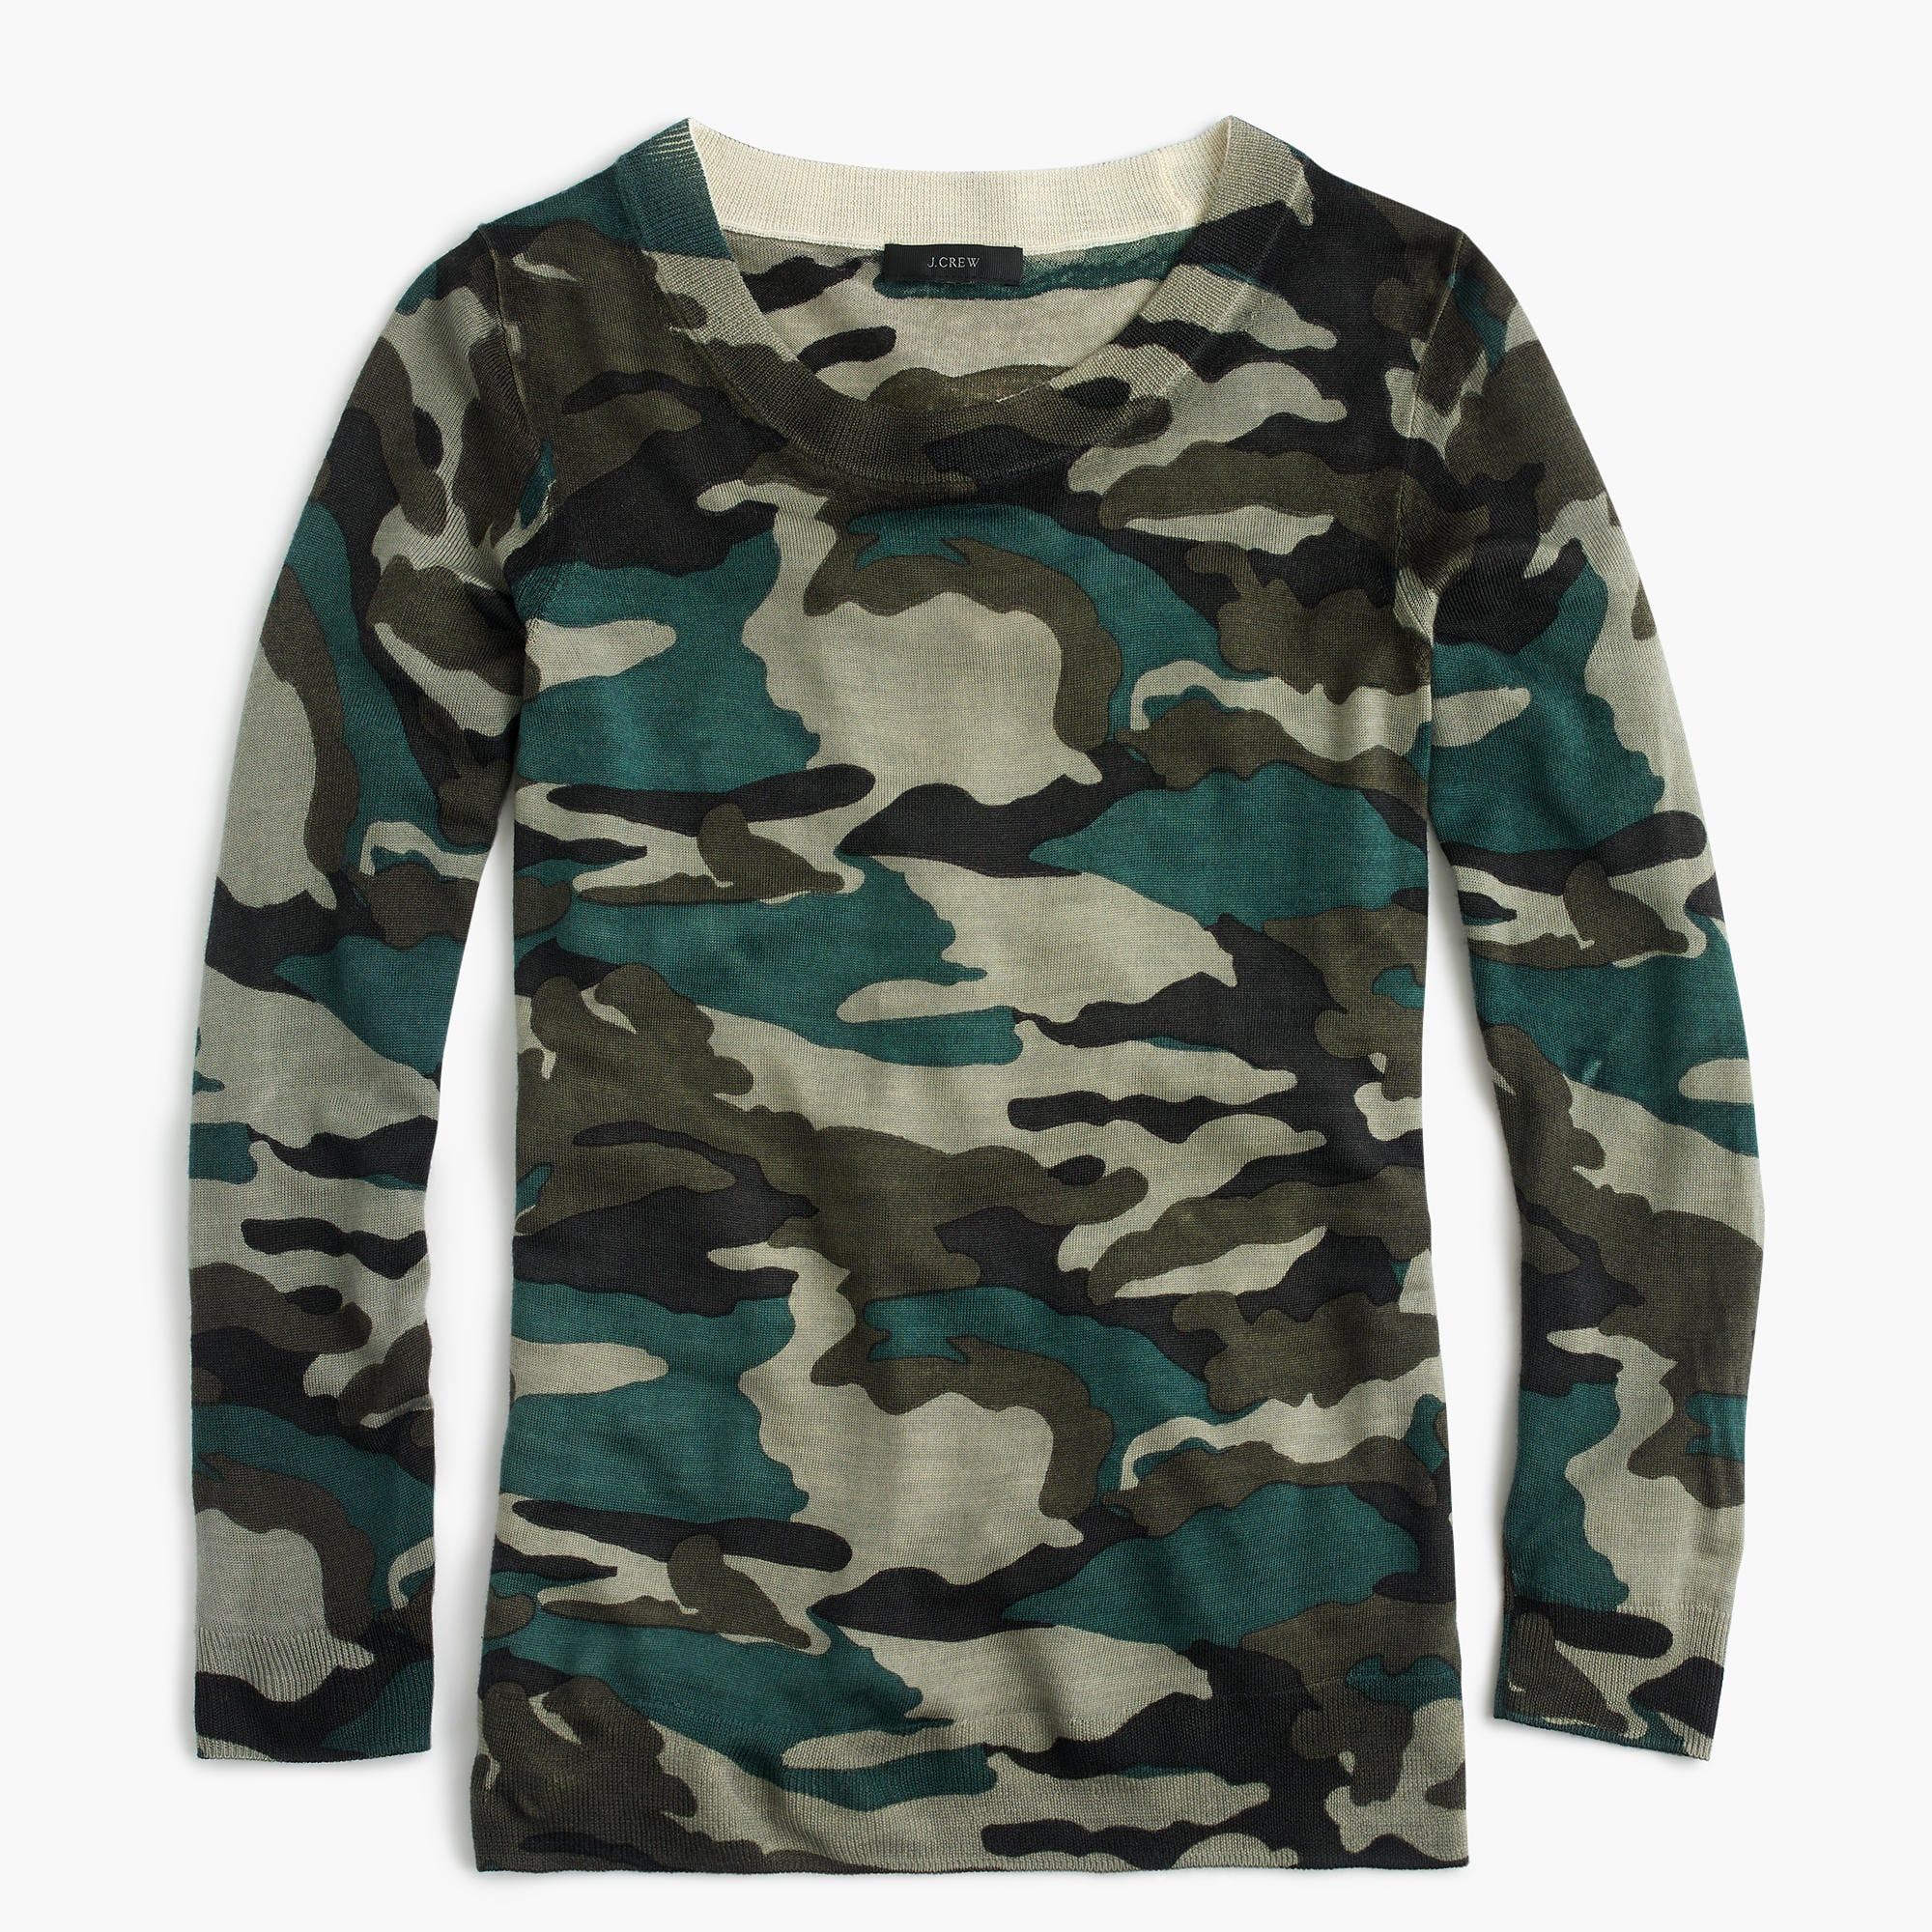 Camouflage is totally a thing right now. And here's a safer way to ...